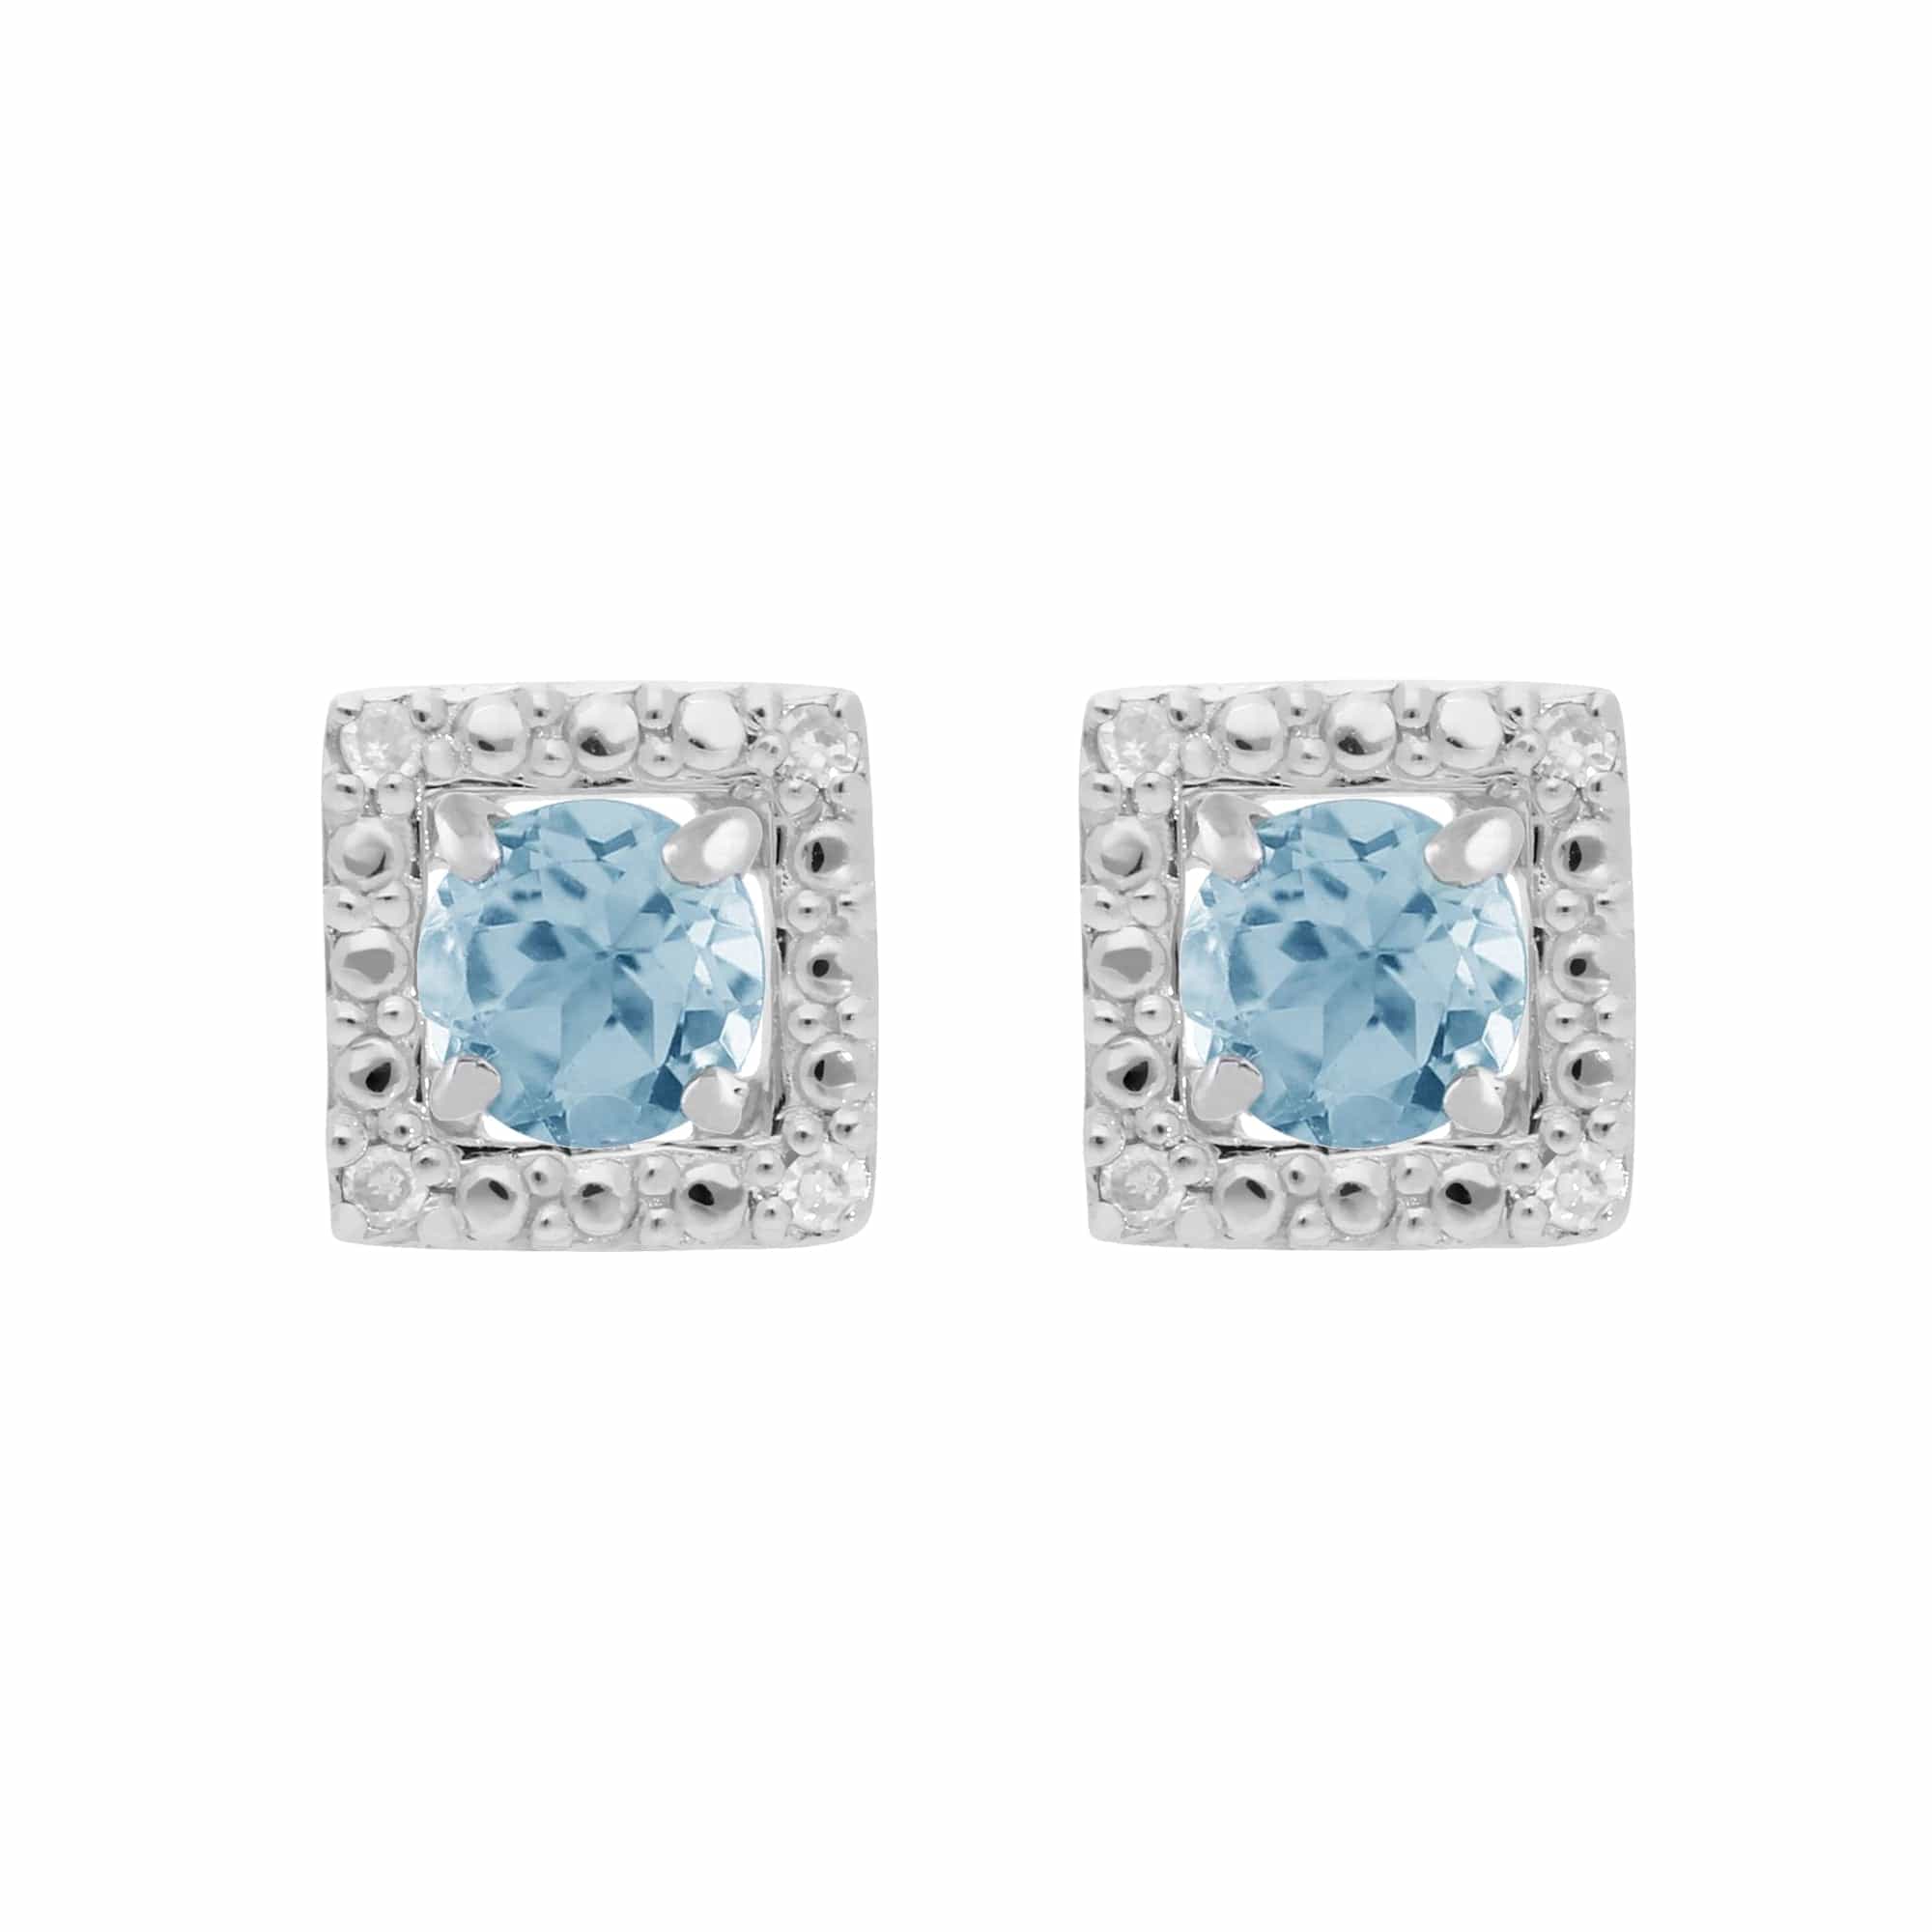 11623-162E0245019 Classic Round Blue Topaz Stud Earrings with Detachable Diamond Square Ear Jacket in 9ct White Gold 1